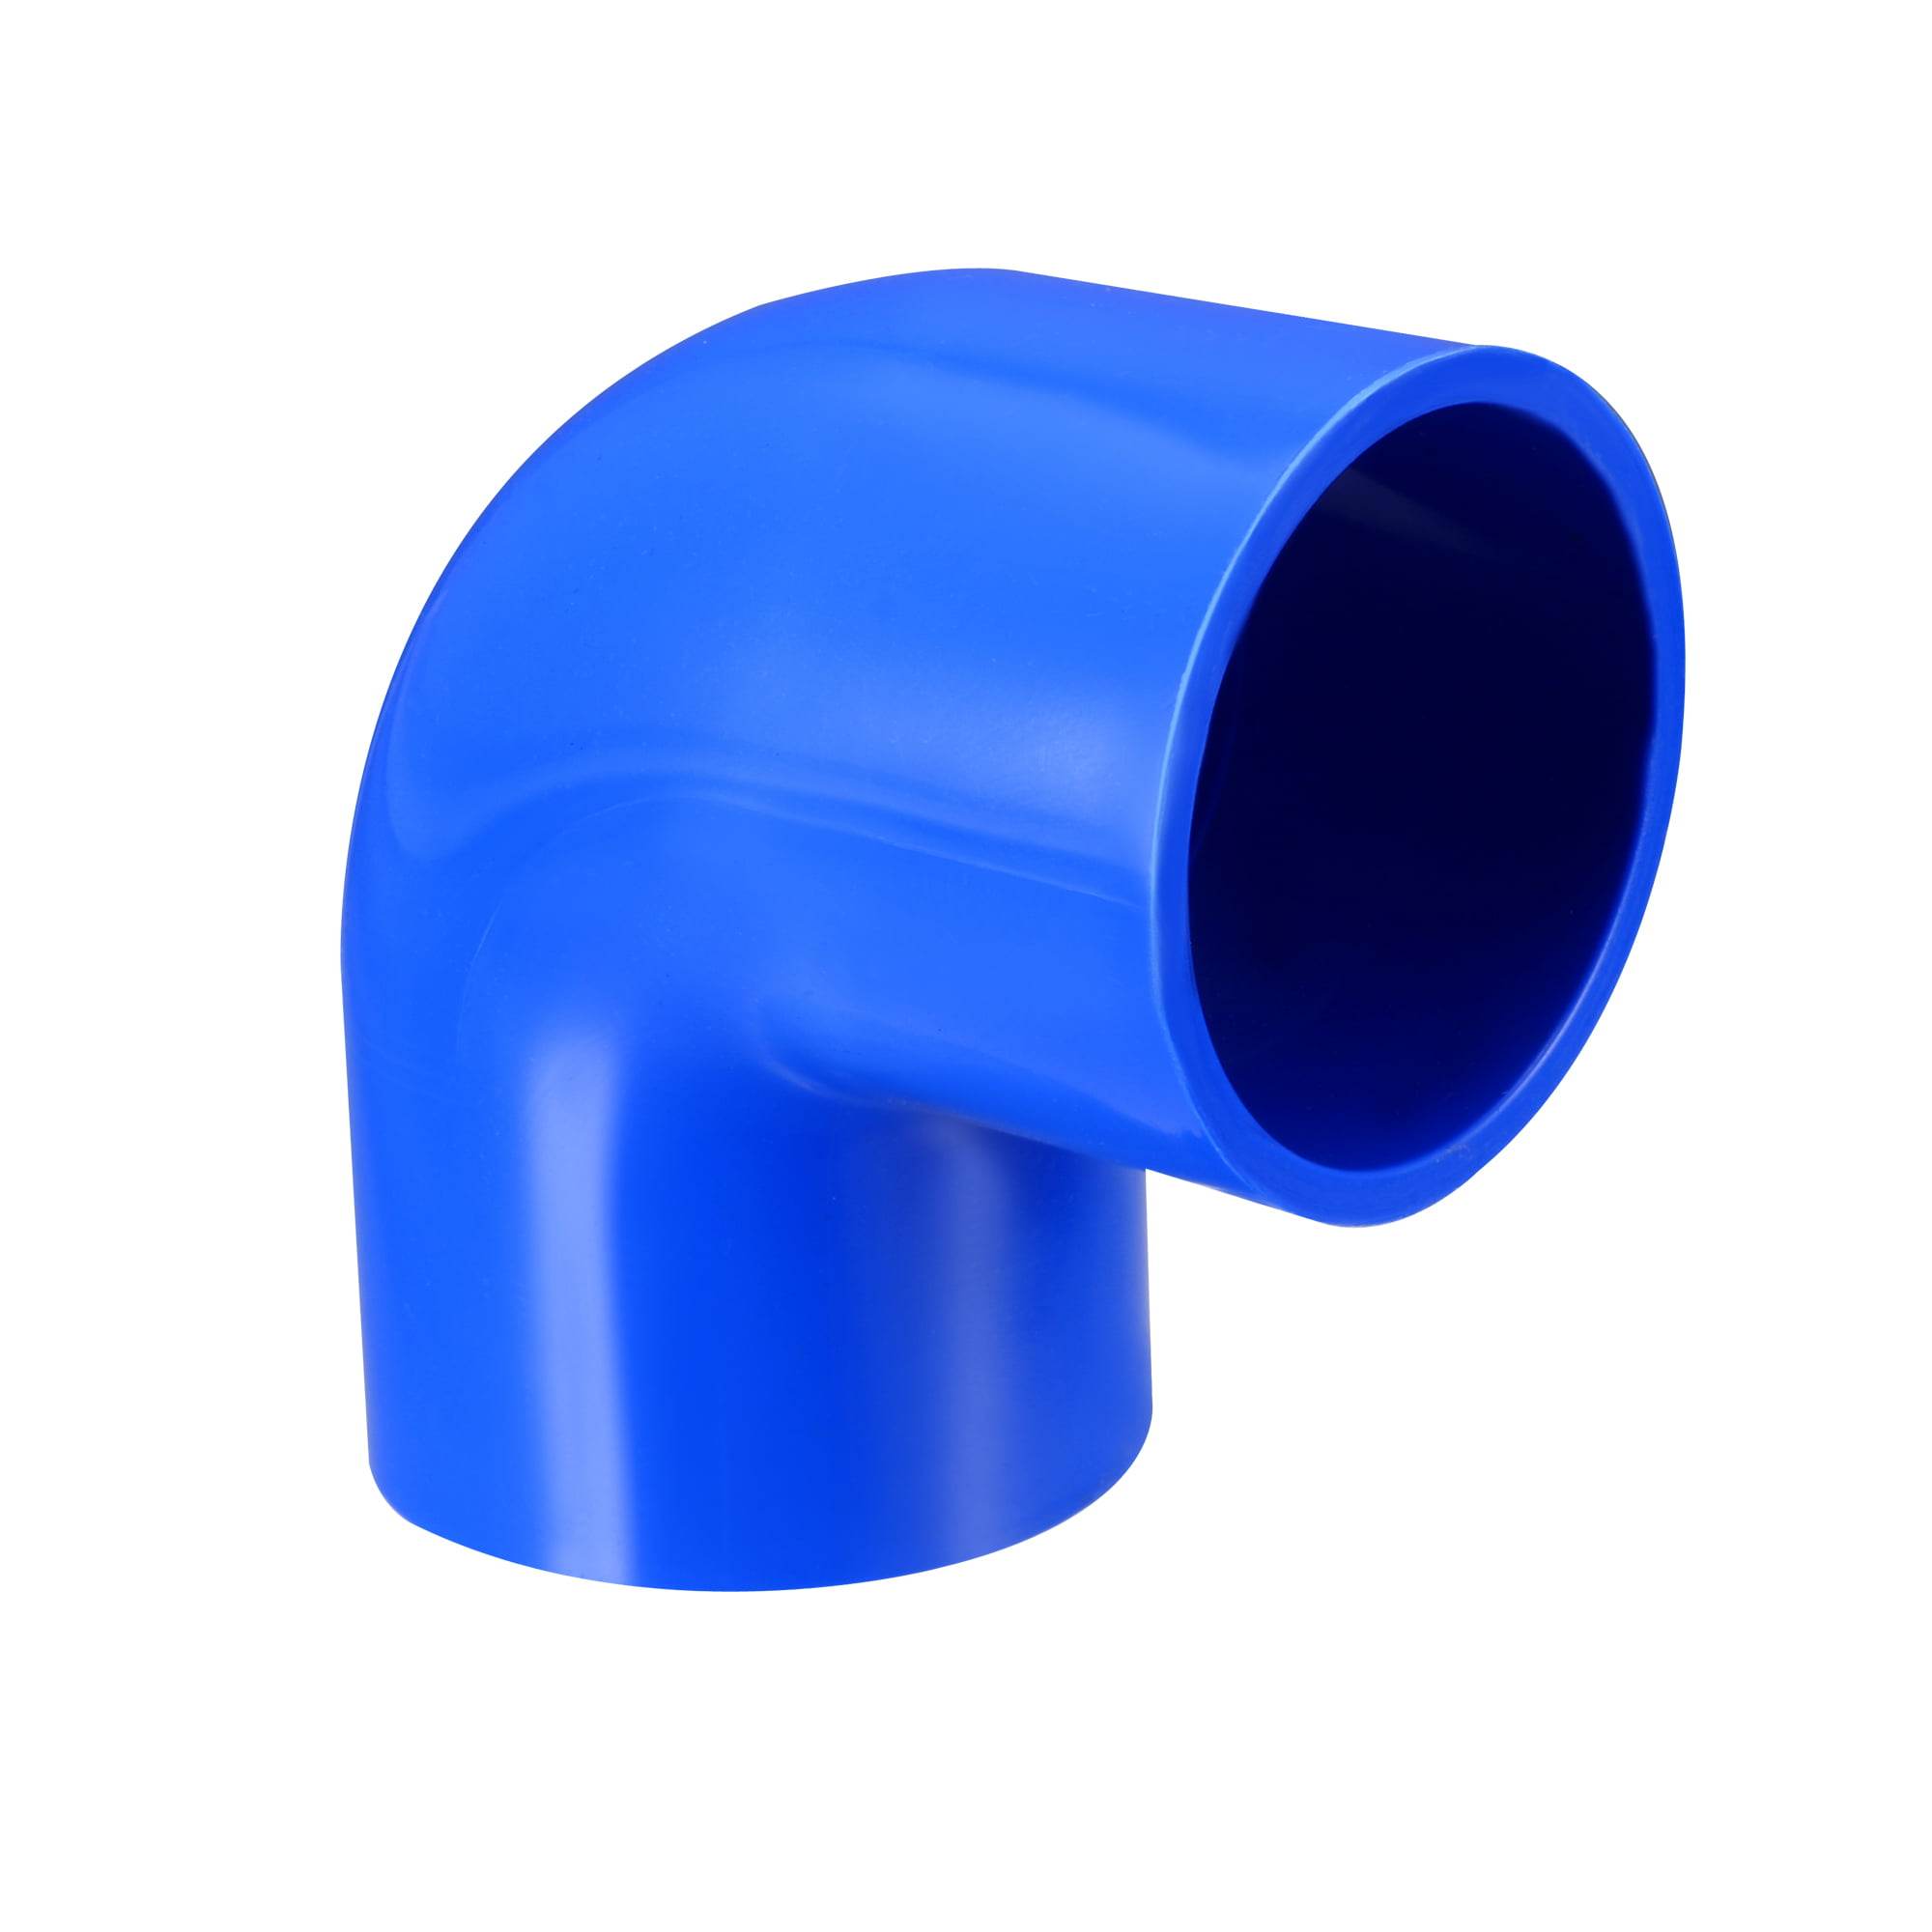 40mm Slip 90 Degree PVC Pipe Fitting Elbow Coupling Adapters Blue 2 Pcs 